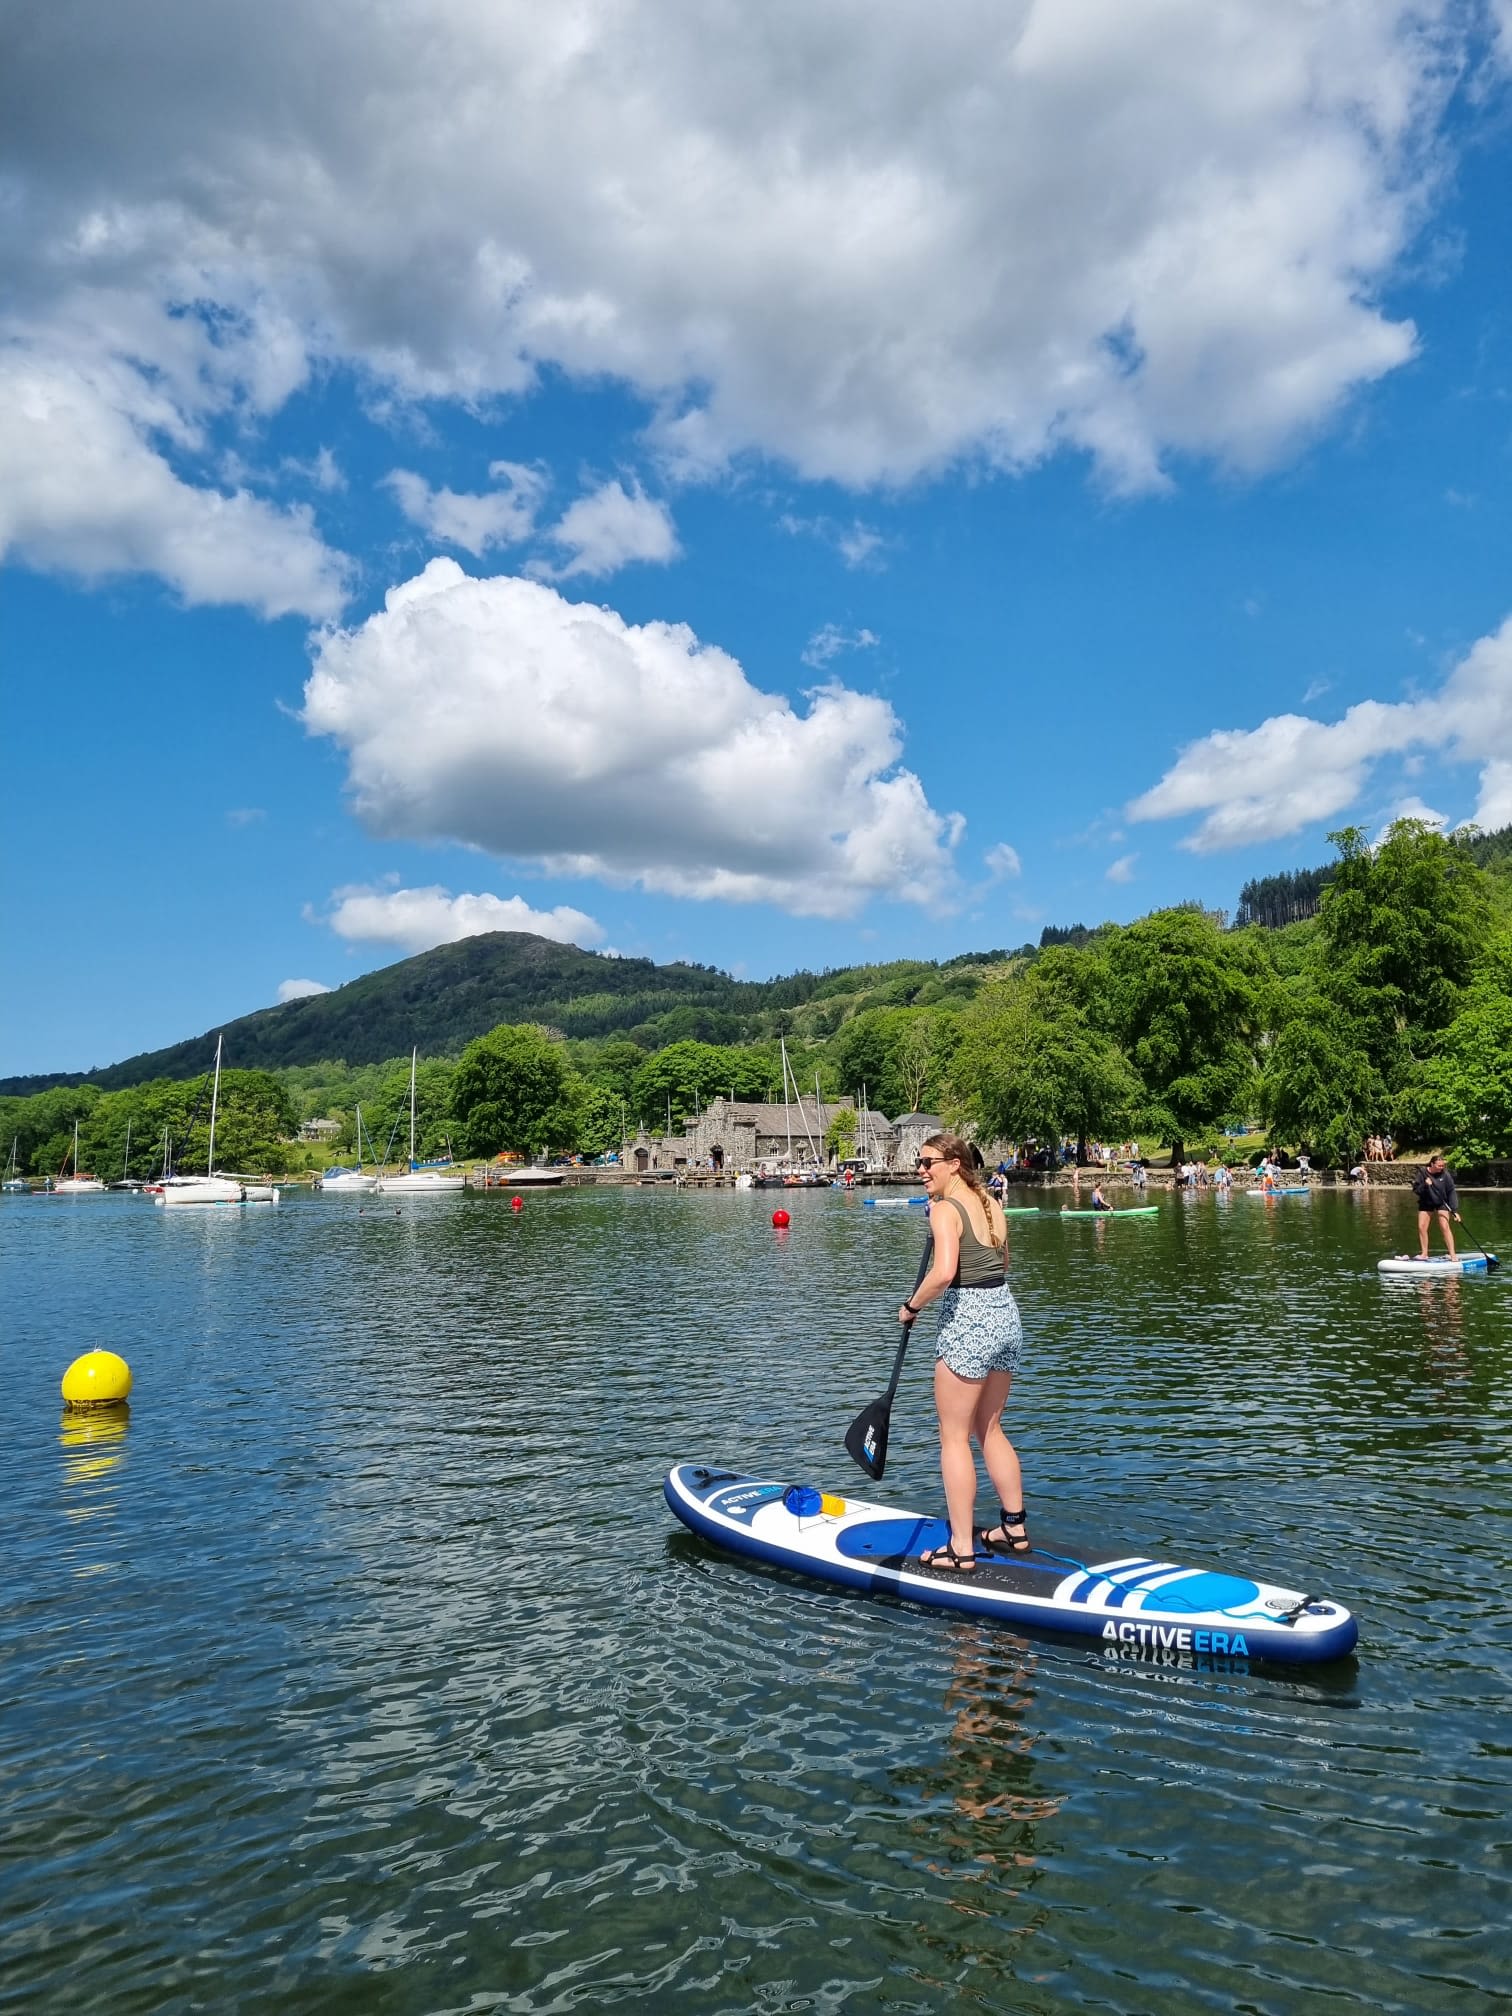 Elise paddle boarding in the Lake District with a backdrop of green hills and mountains and a blue sky 